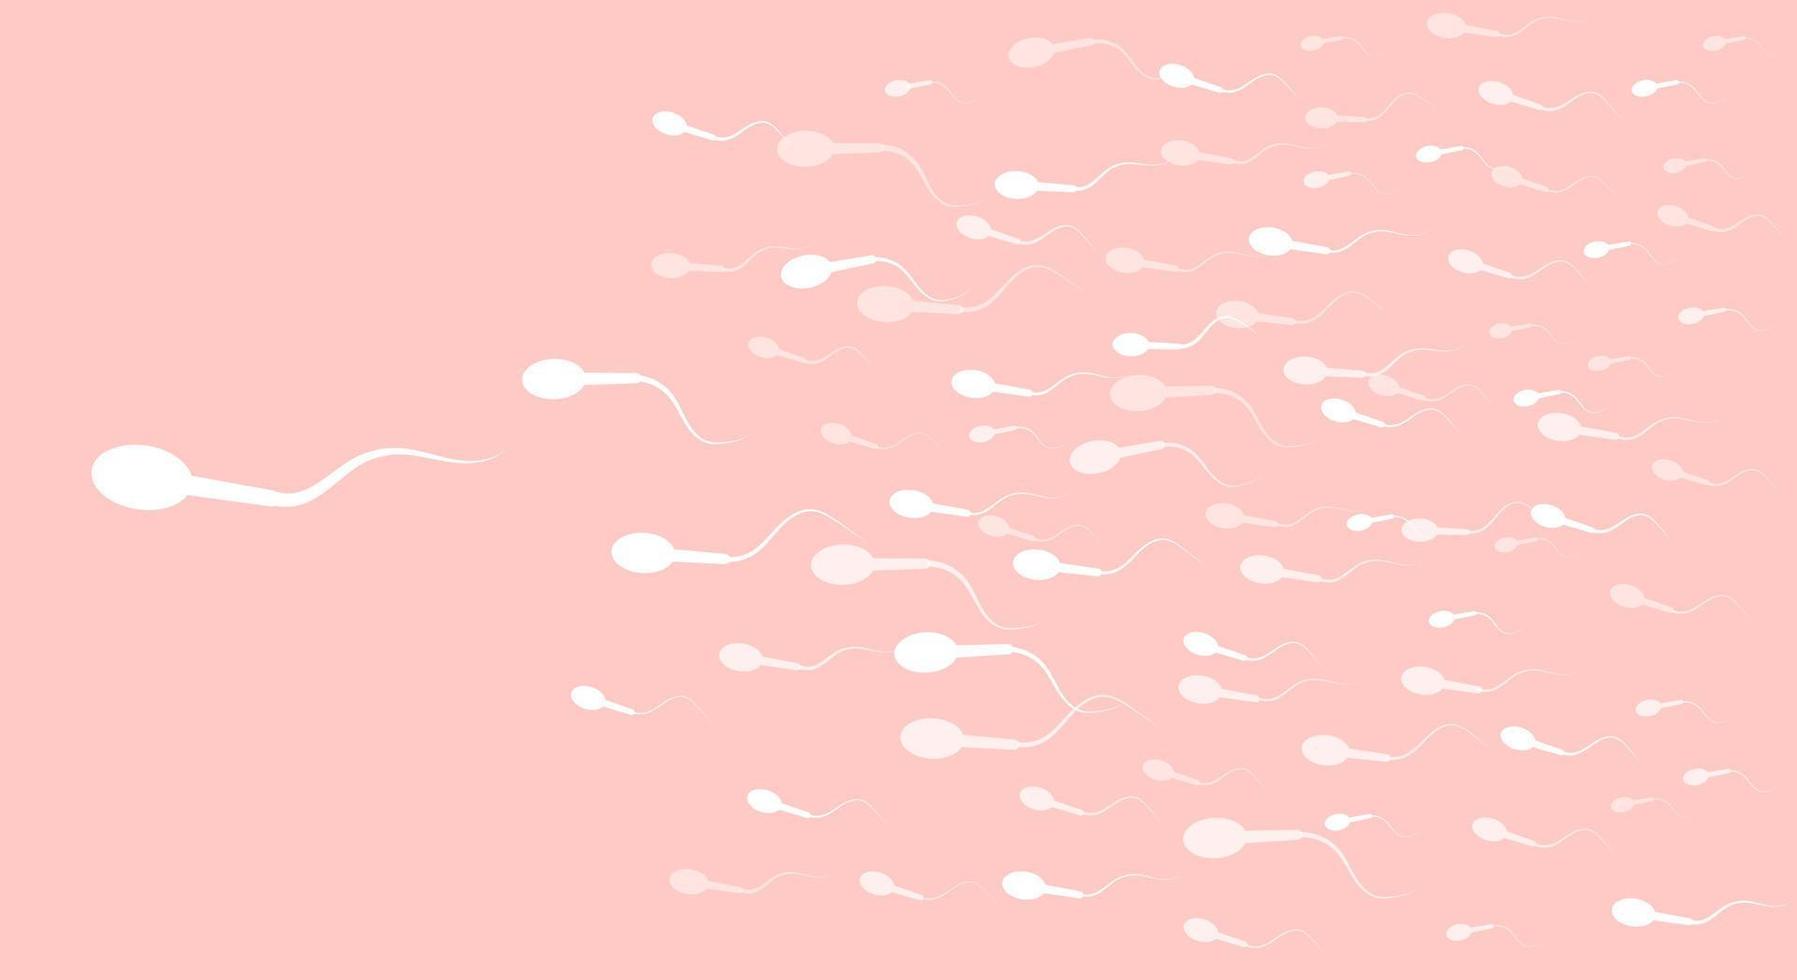 The spermatozoon has shot forward and is heading straight towards the target, pink background. Vector illustration